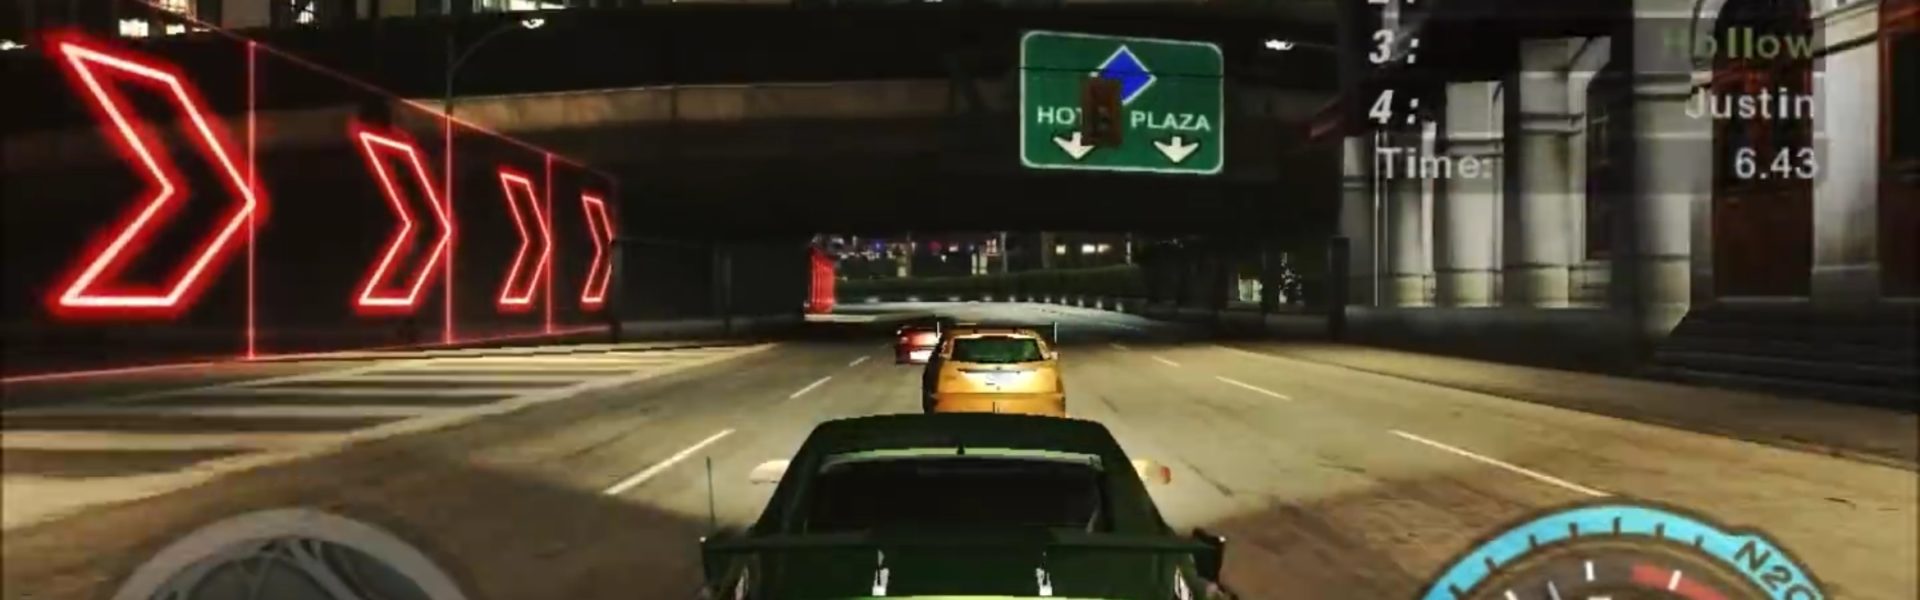 need for speed undercover highly compressed 32mb cso